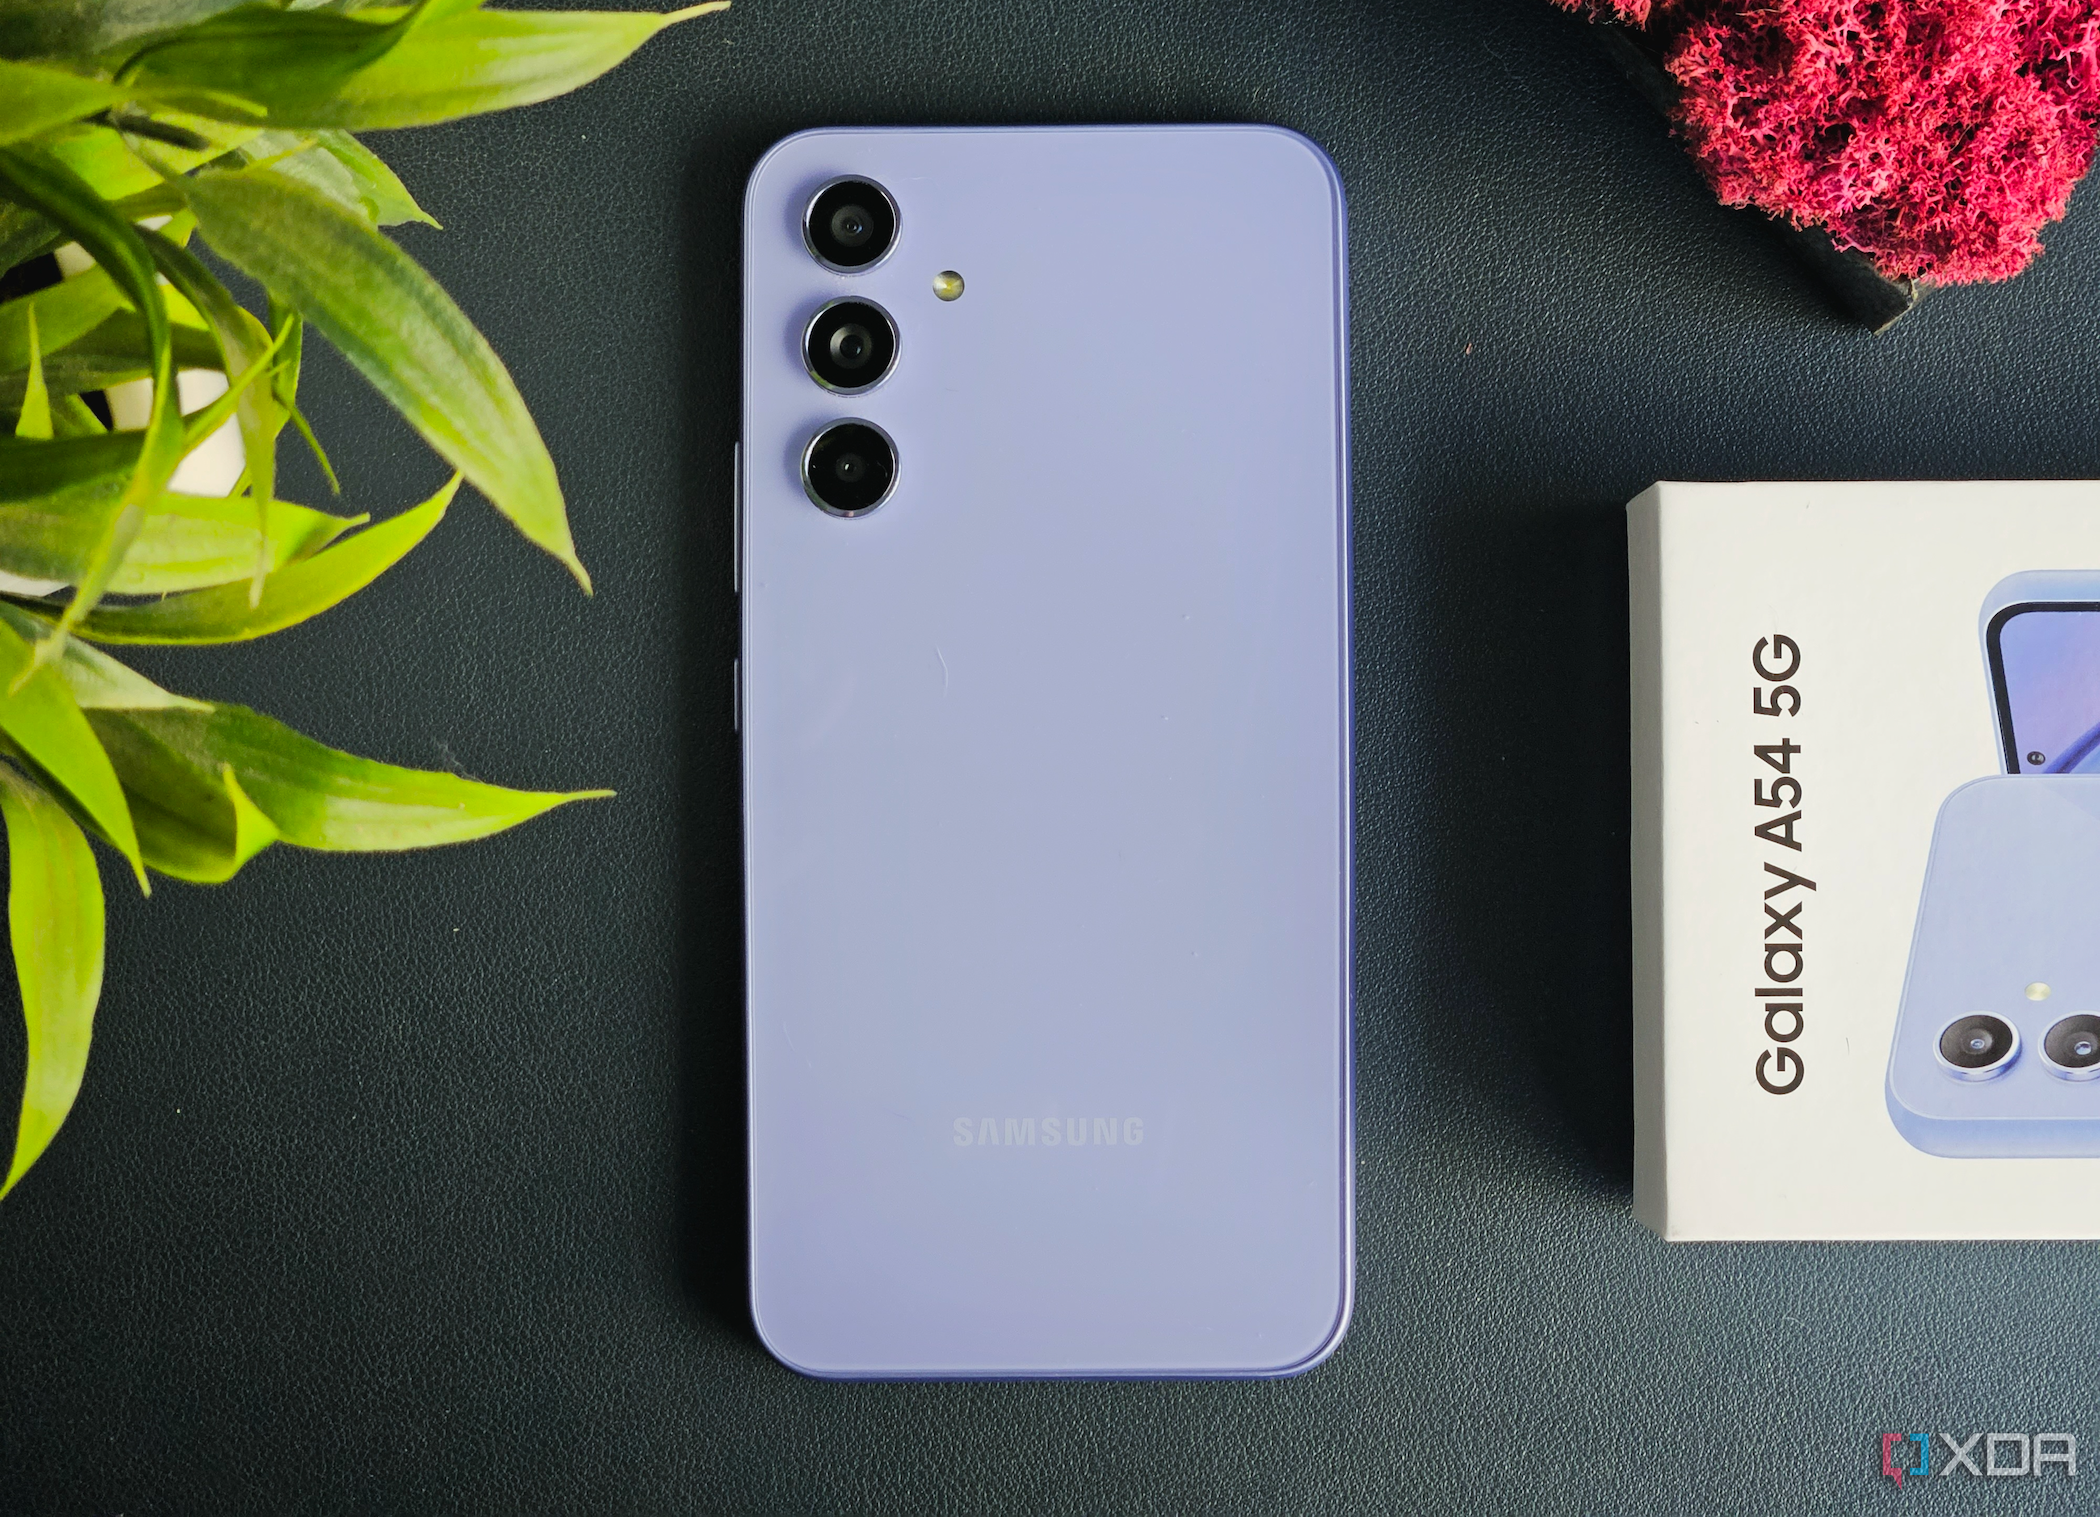 The Samsung Galaxy A54 in Awesome Violet color resting on a leather mat next to its retail box.